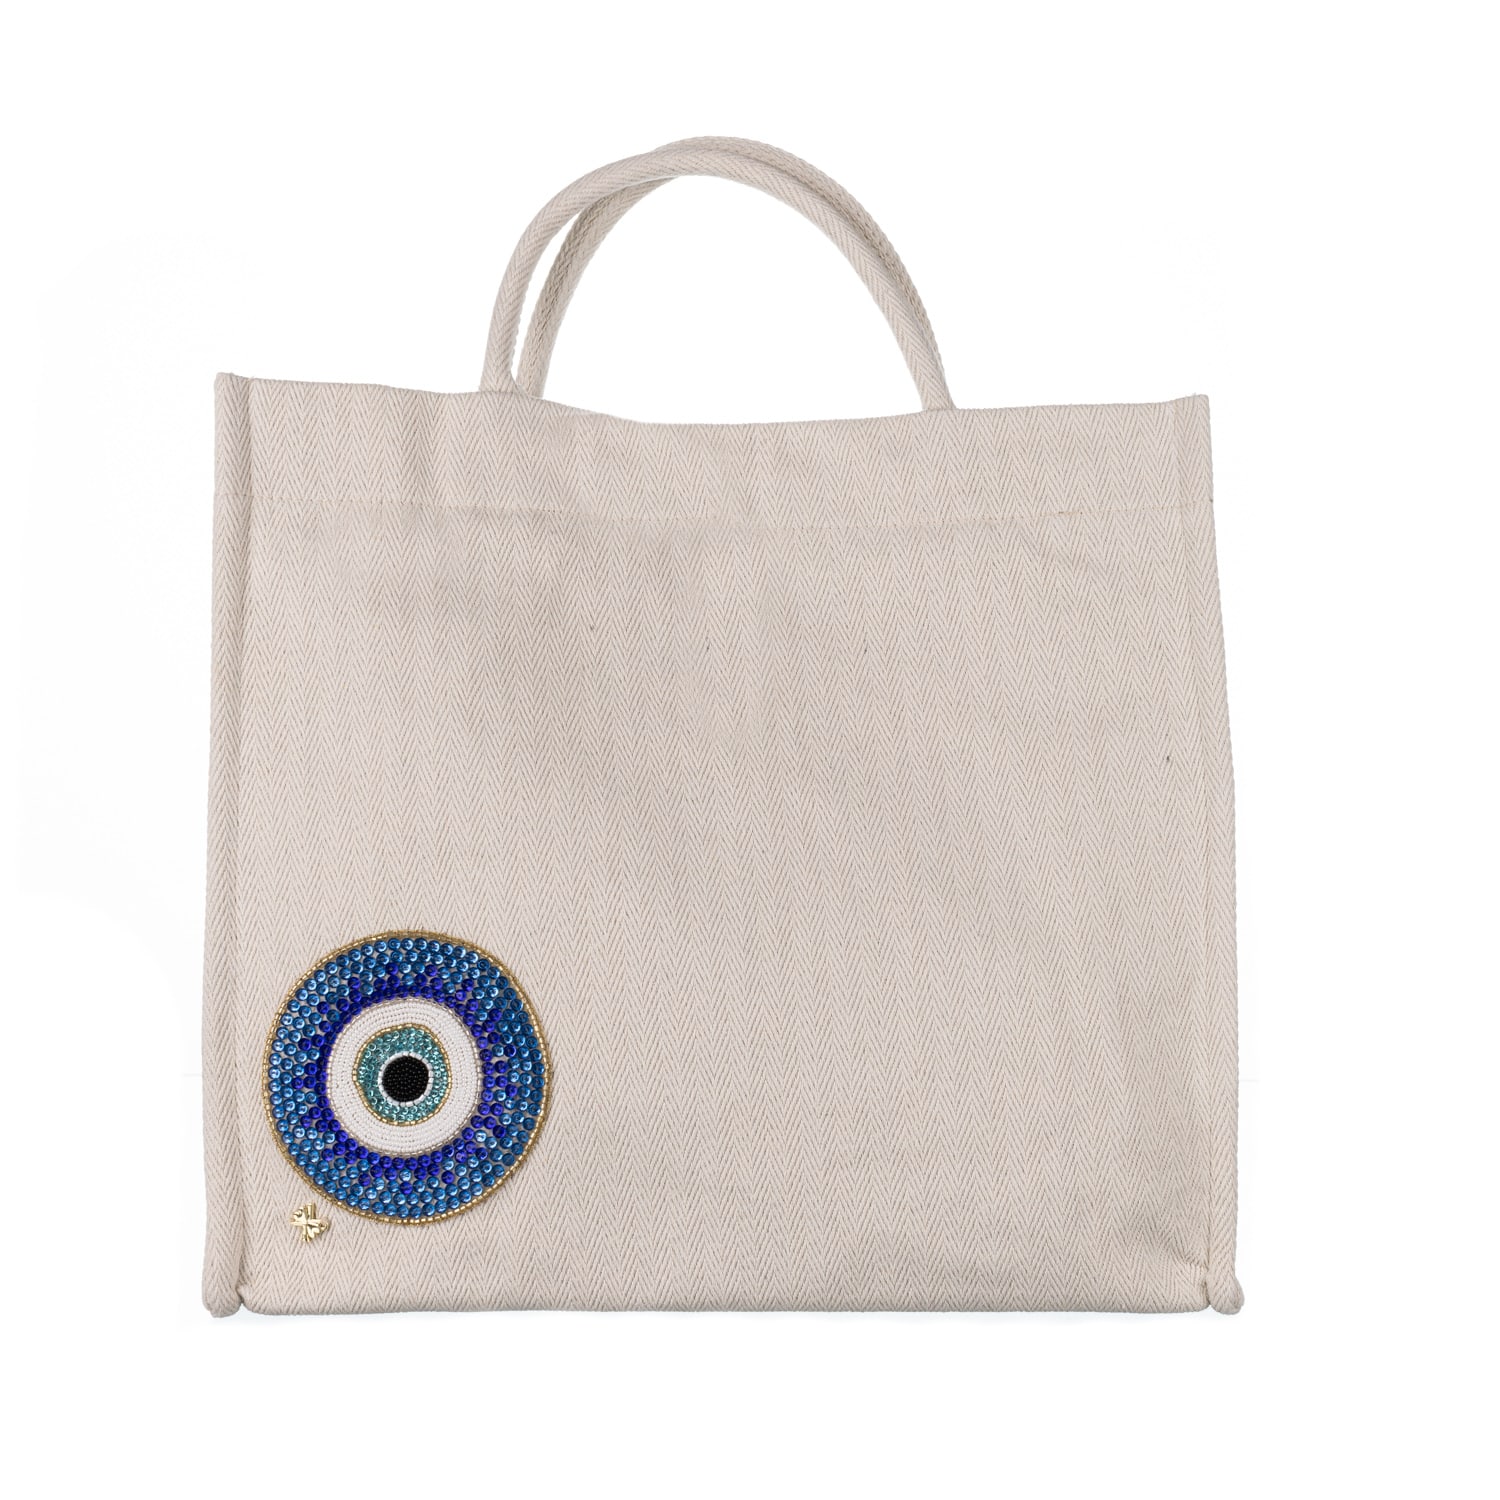 Women’s White Laines Couture Hand Embellished Evil Eye Large Tote Bag - Cream One Size Laines London